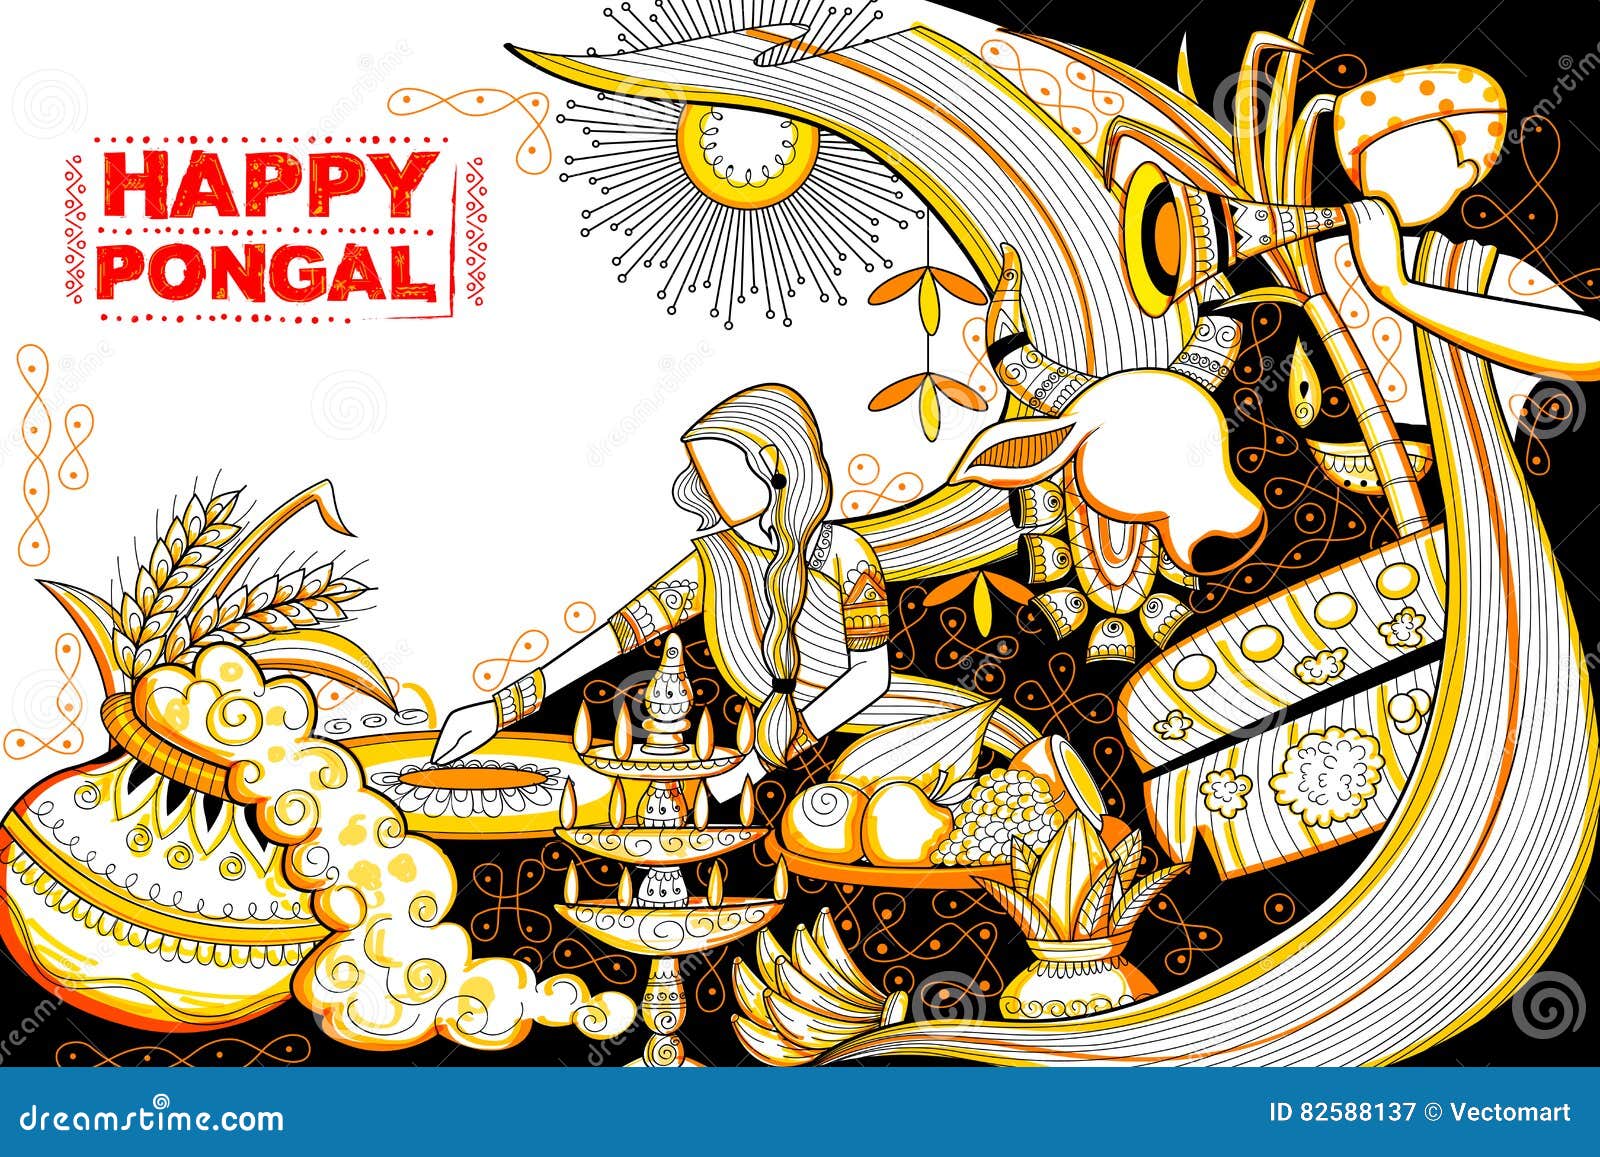 Happy Pongal Greeting Background Stock Vector - Illustration of ...